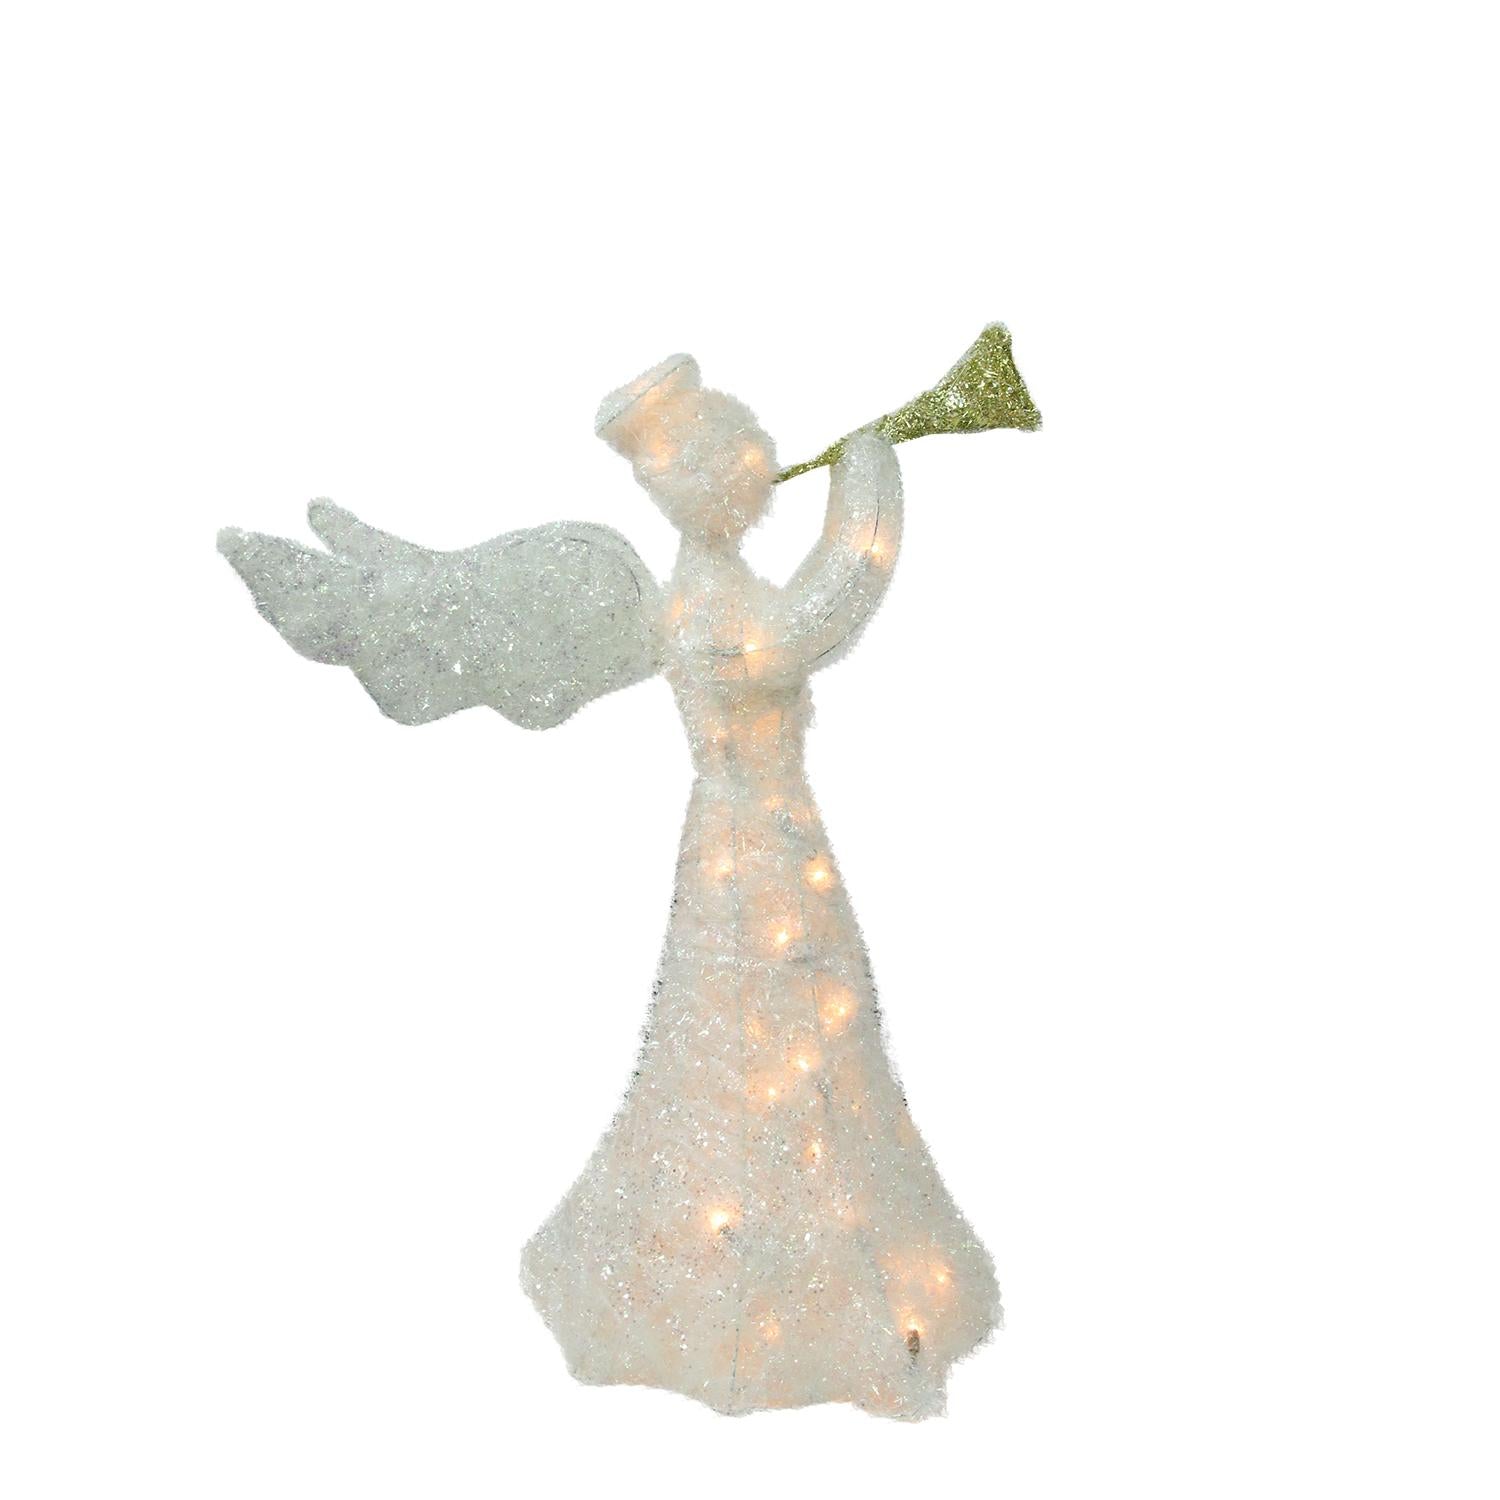 29" Lighted Tinsel Trumpeting Angel Christmas Outdoor Decoration